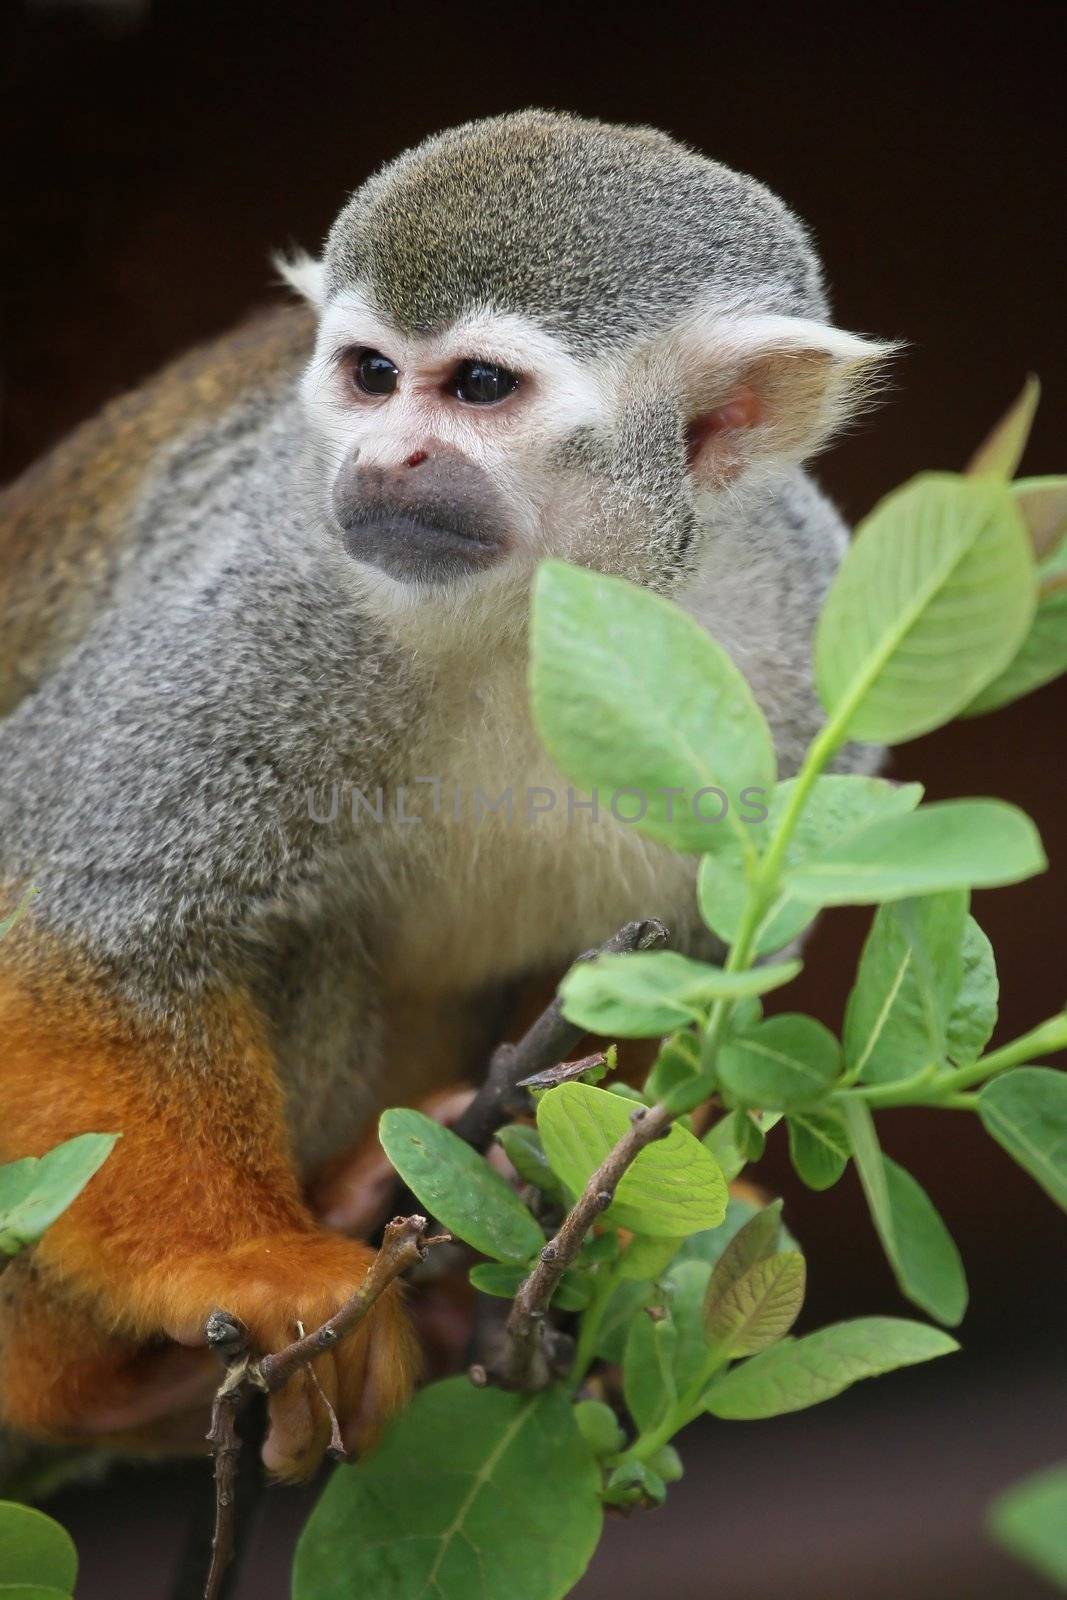 Cute squirrel monkey on a branch in a tree